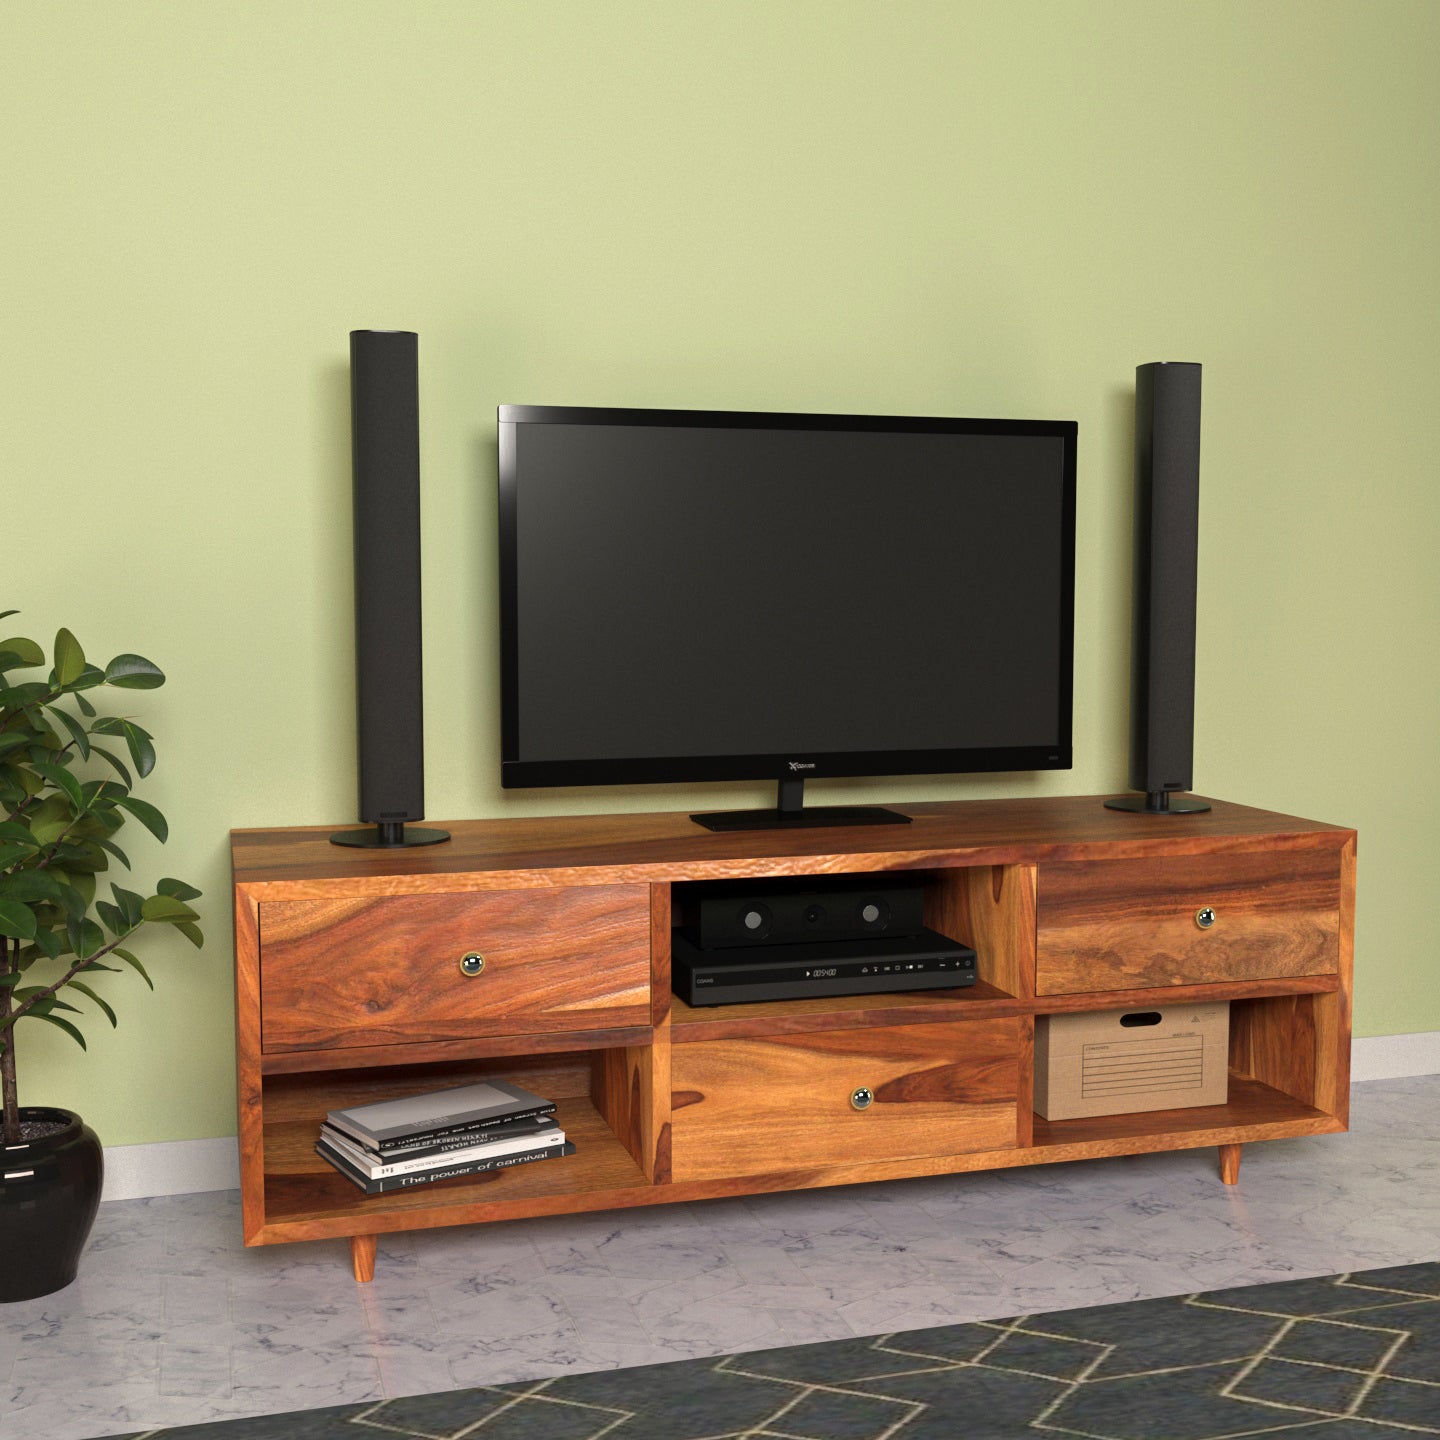 Melbourne Melody Style Wooden Handmade with Multi Storage TV Unit for Home Tv stand